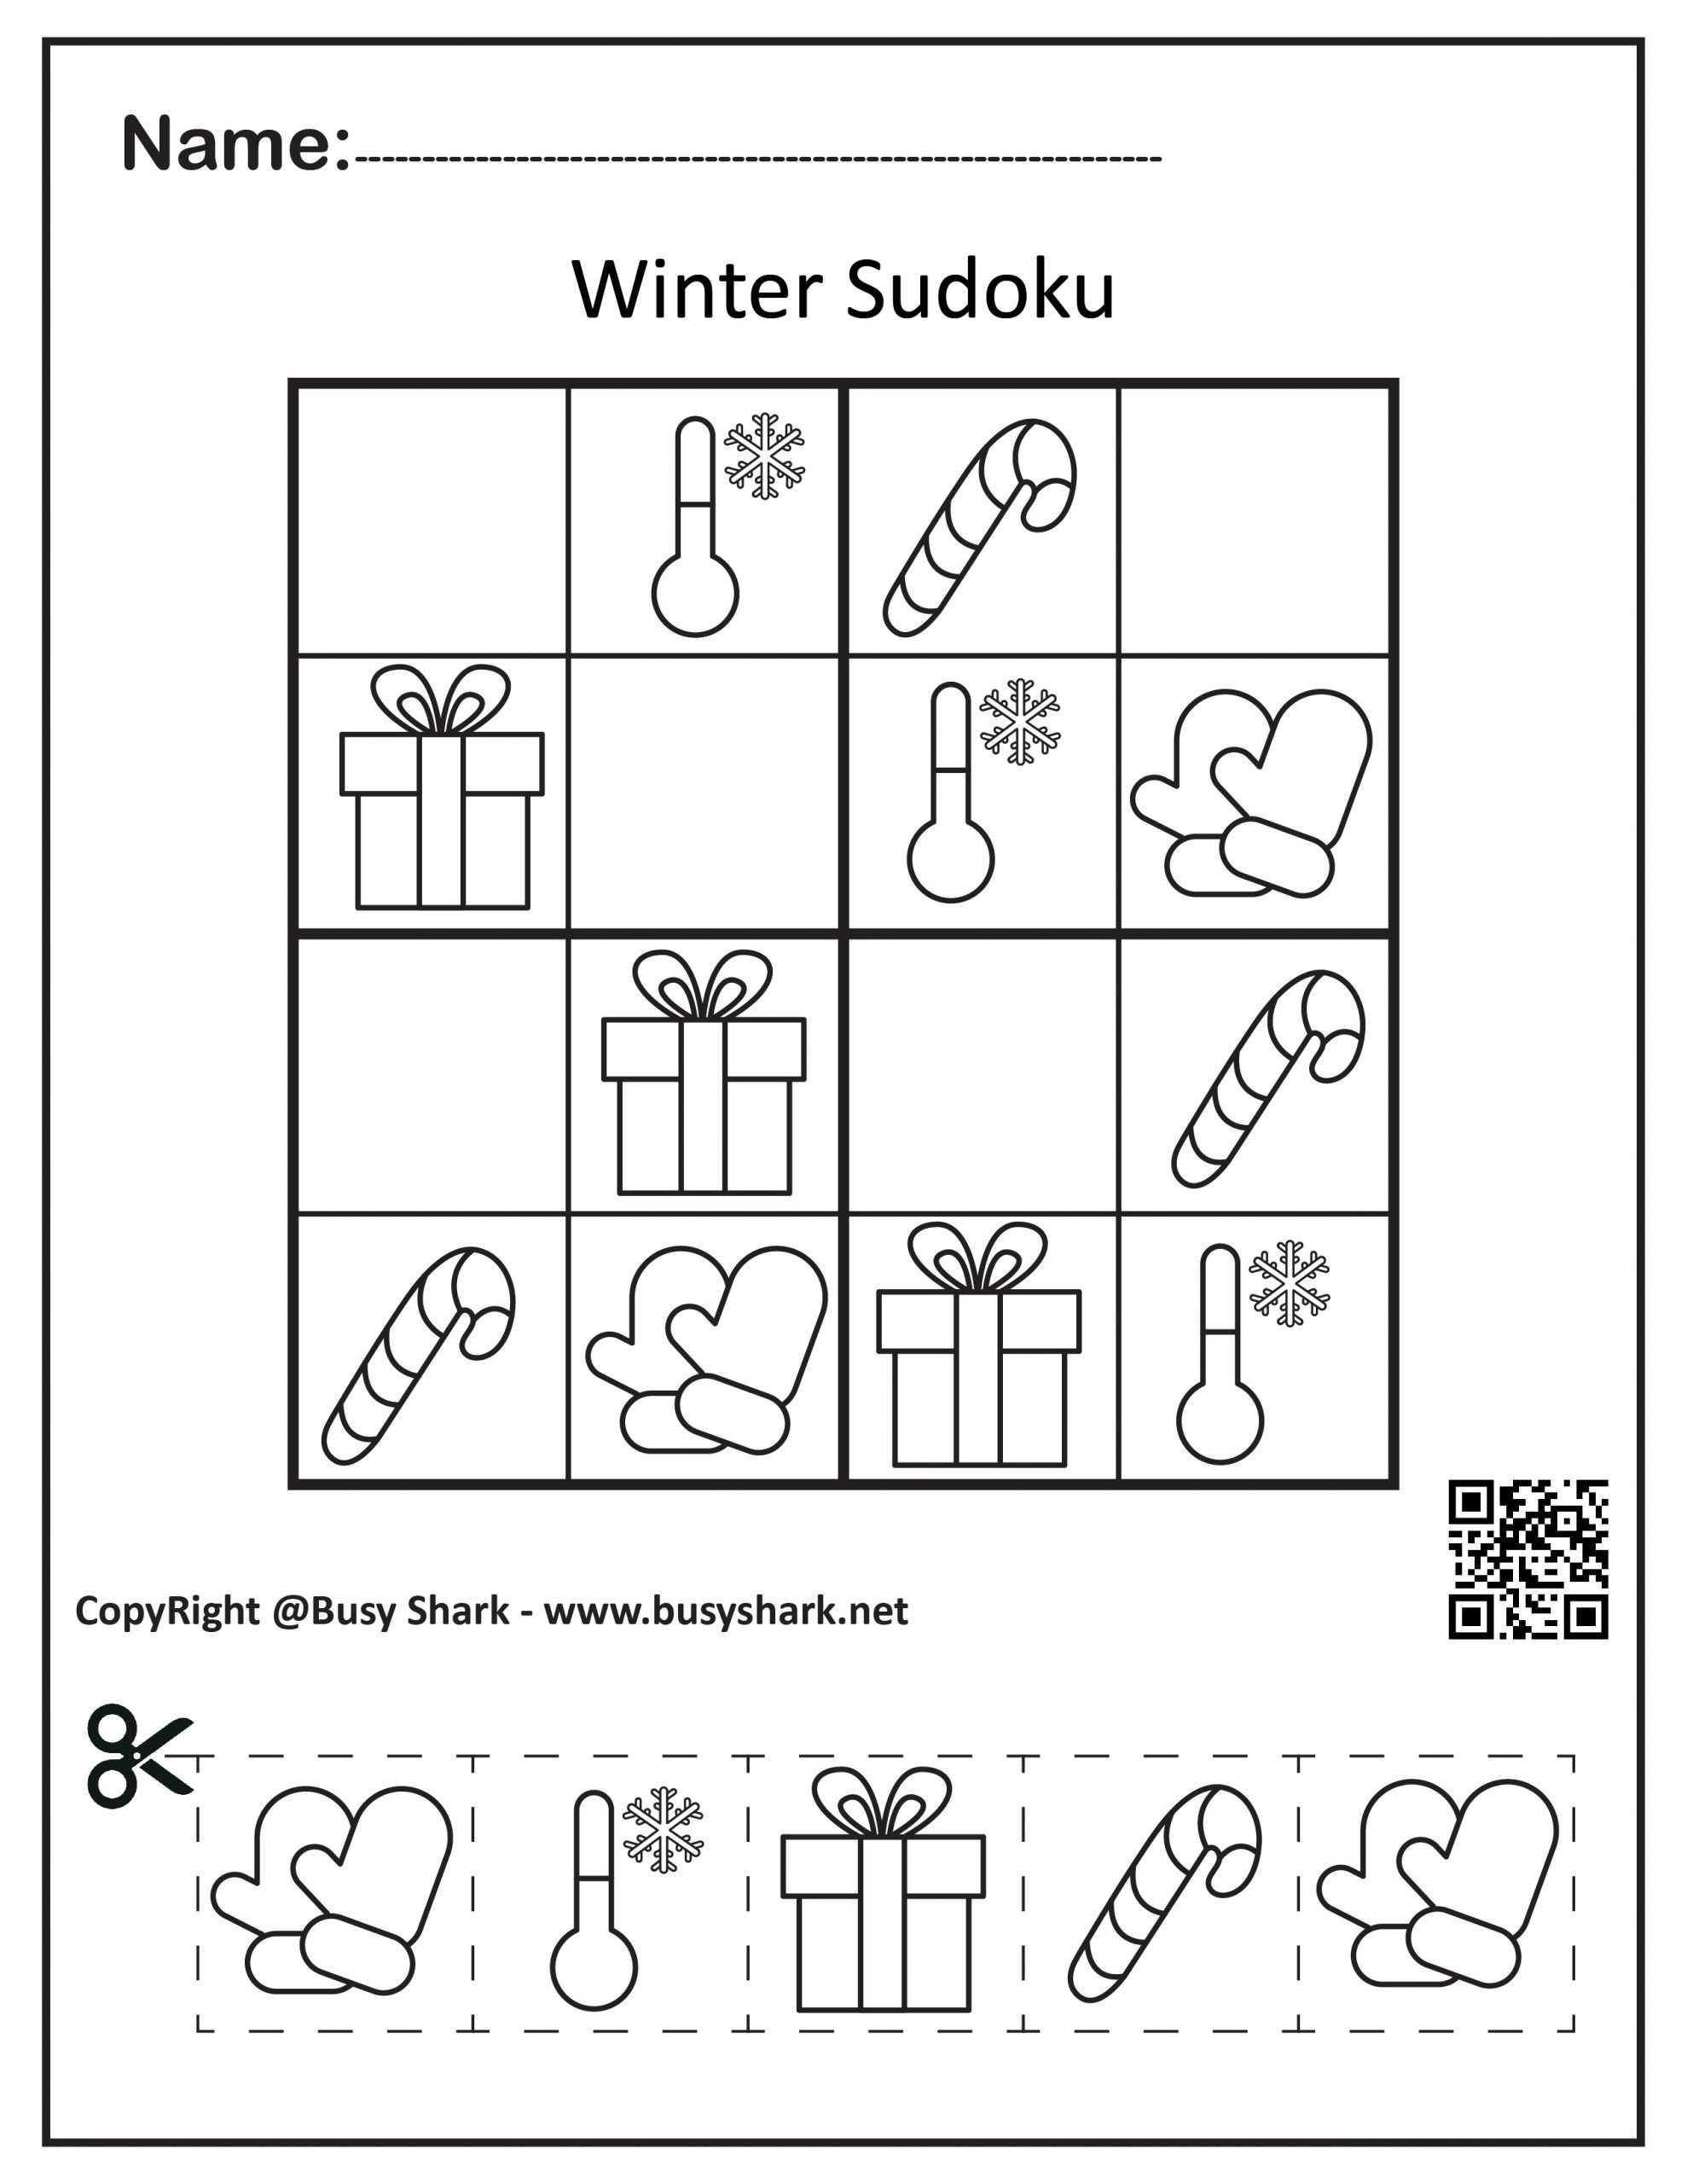 Easy sudoku x winter pictures coloring book for kids